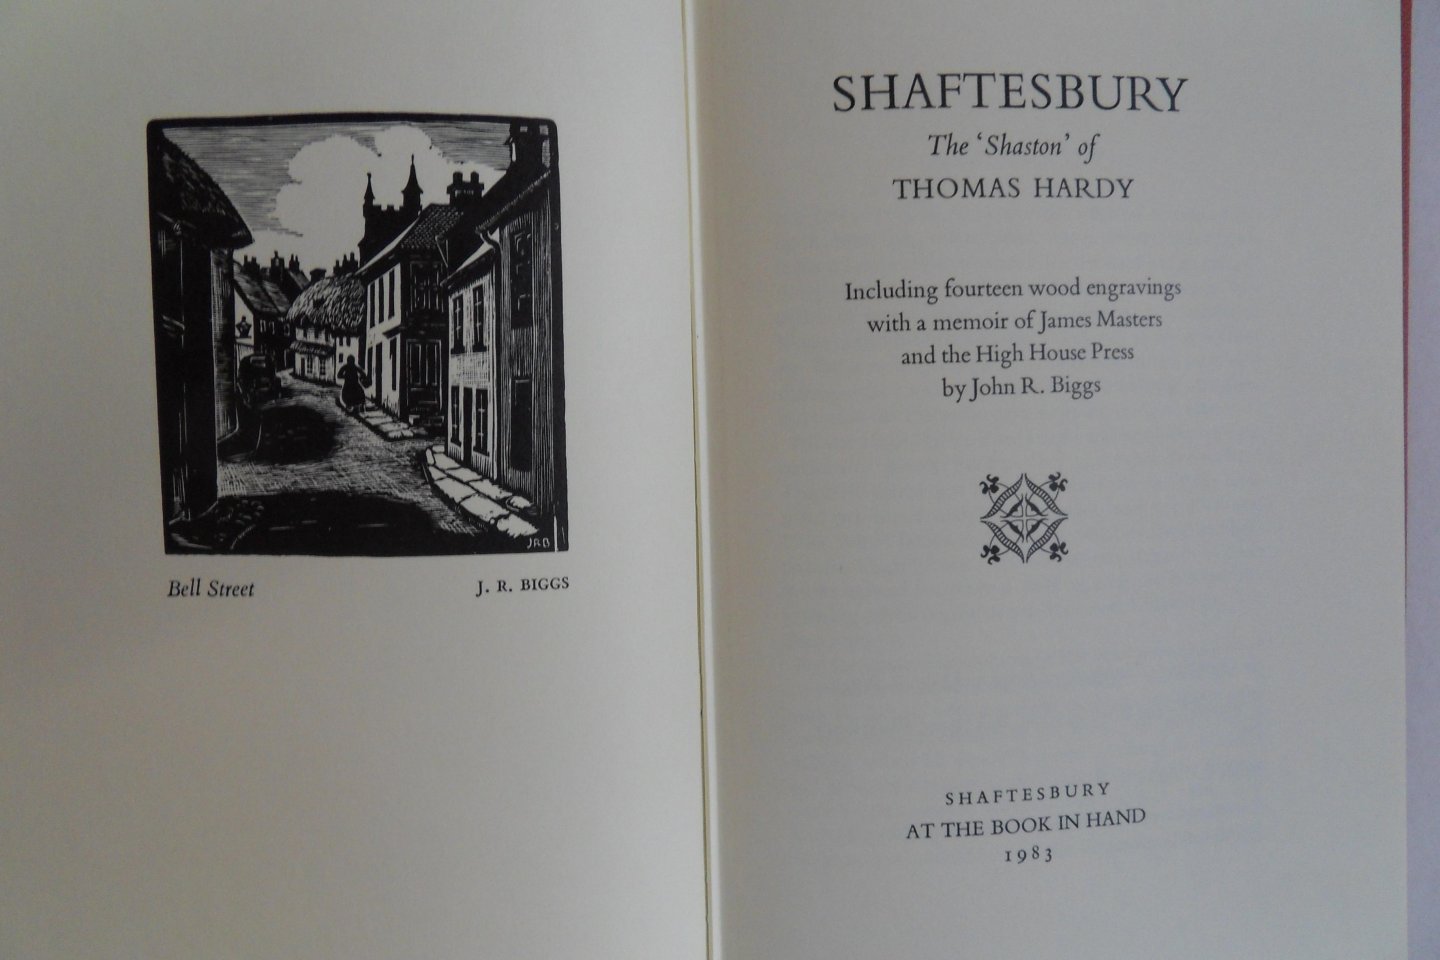 Driver, Christopher; Biggs, John R. - Shaftesbury. - The "Shaston" of Thomas Hardy. - Including fourteen wood engravings with a memoir of James Masters  and the High House Press by John R. Biggs.